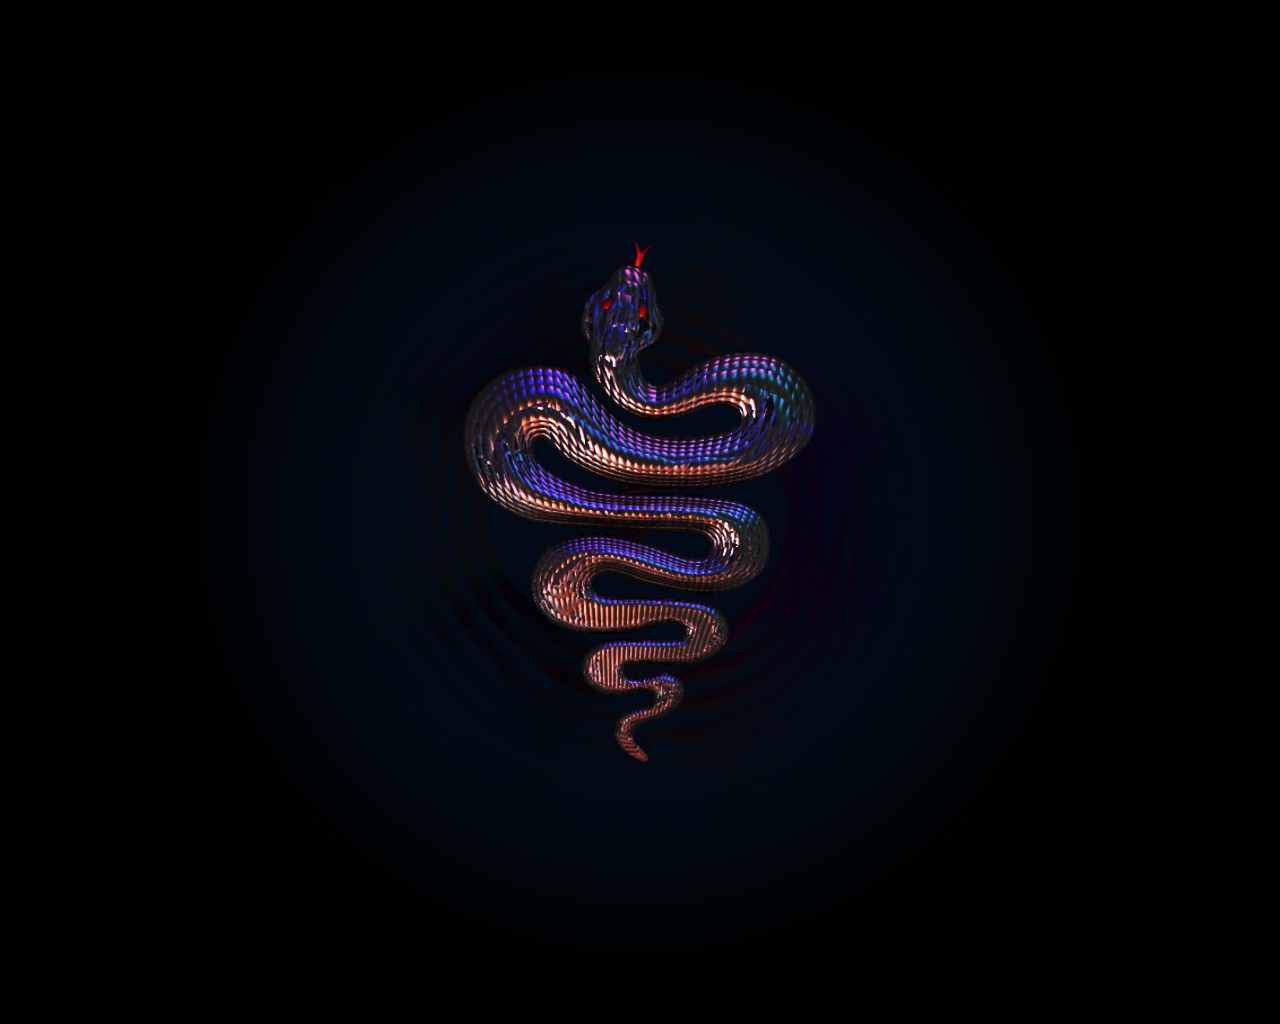 wallpaper snake. Posted by Vannes nouncellice at 12:14 PM